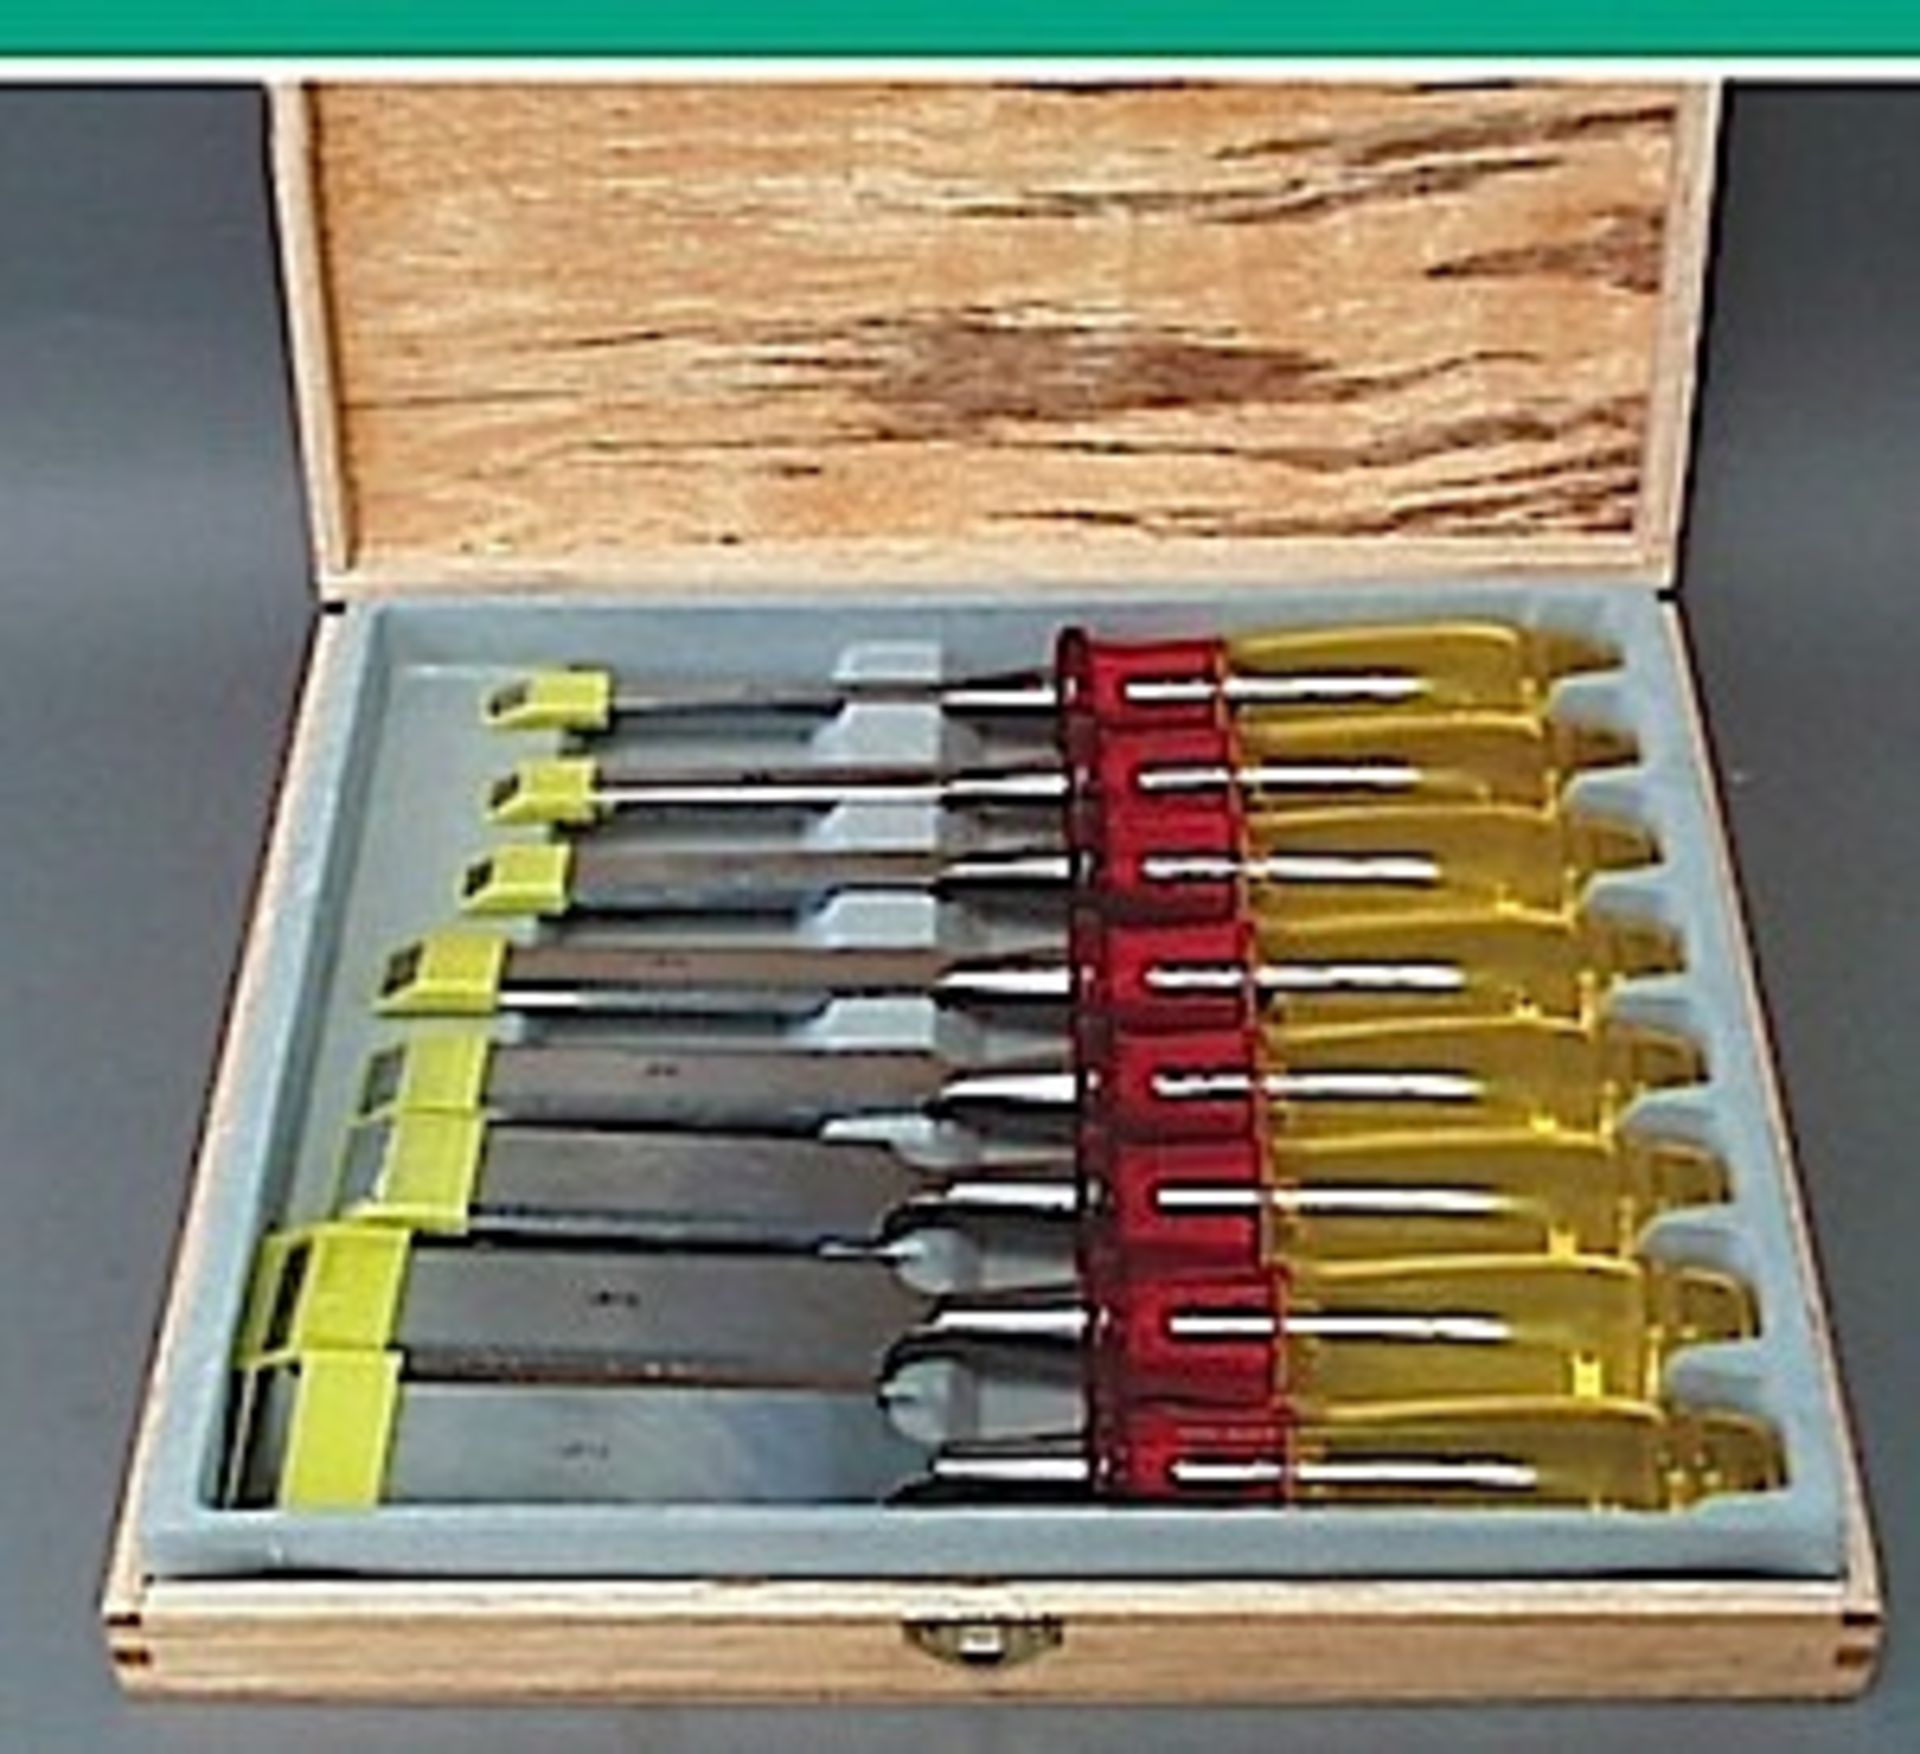 V Brand New Eight Piece Professional Chisel Set With Wooden Storage Case X 2 YOUR BID PRICE TO BE - Image 2 of 2